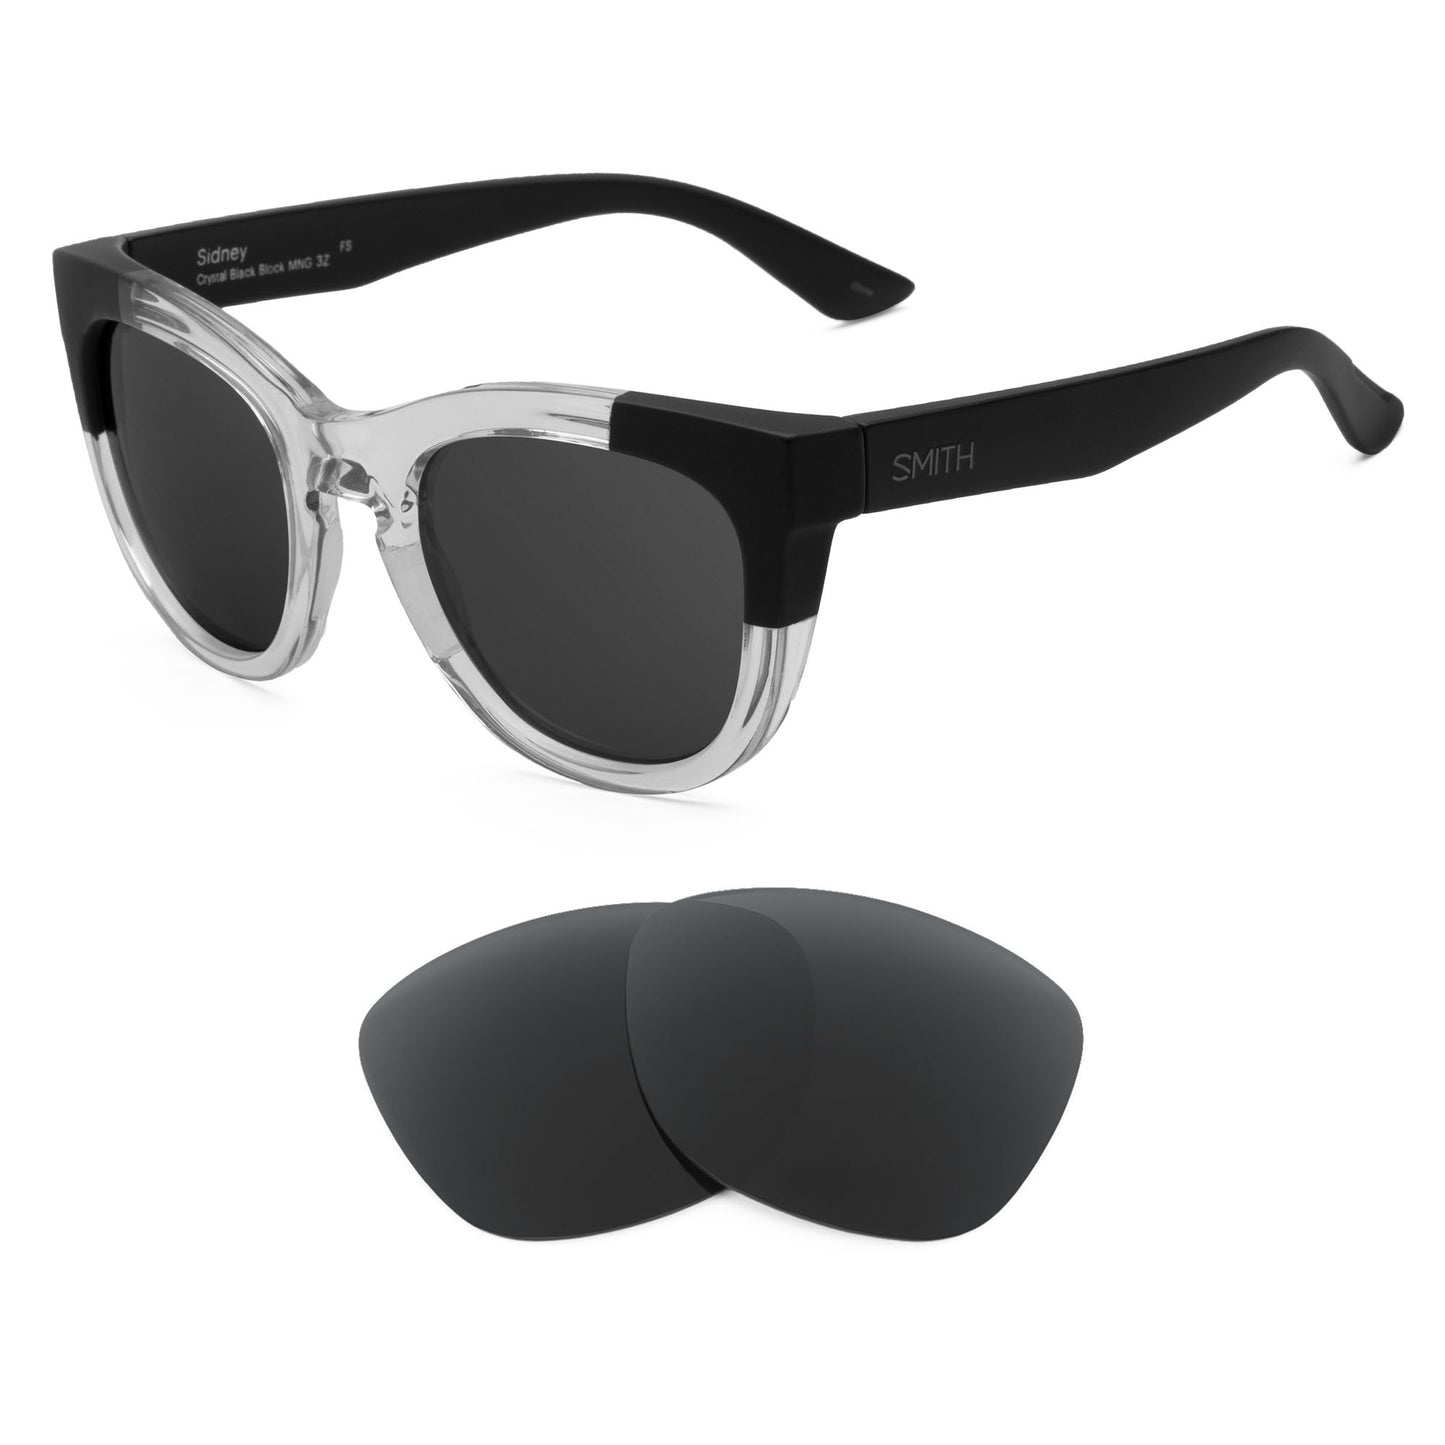 Smith Sidney sunglasses with replacement lenses